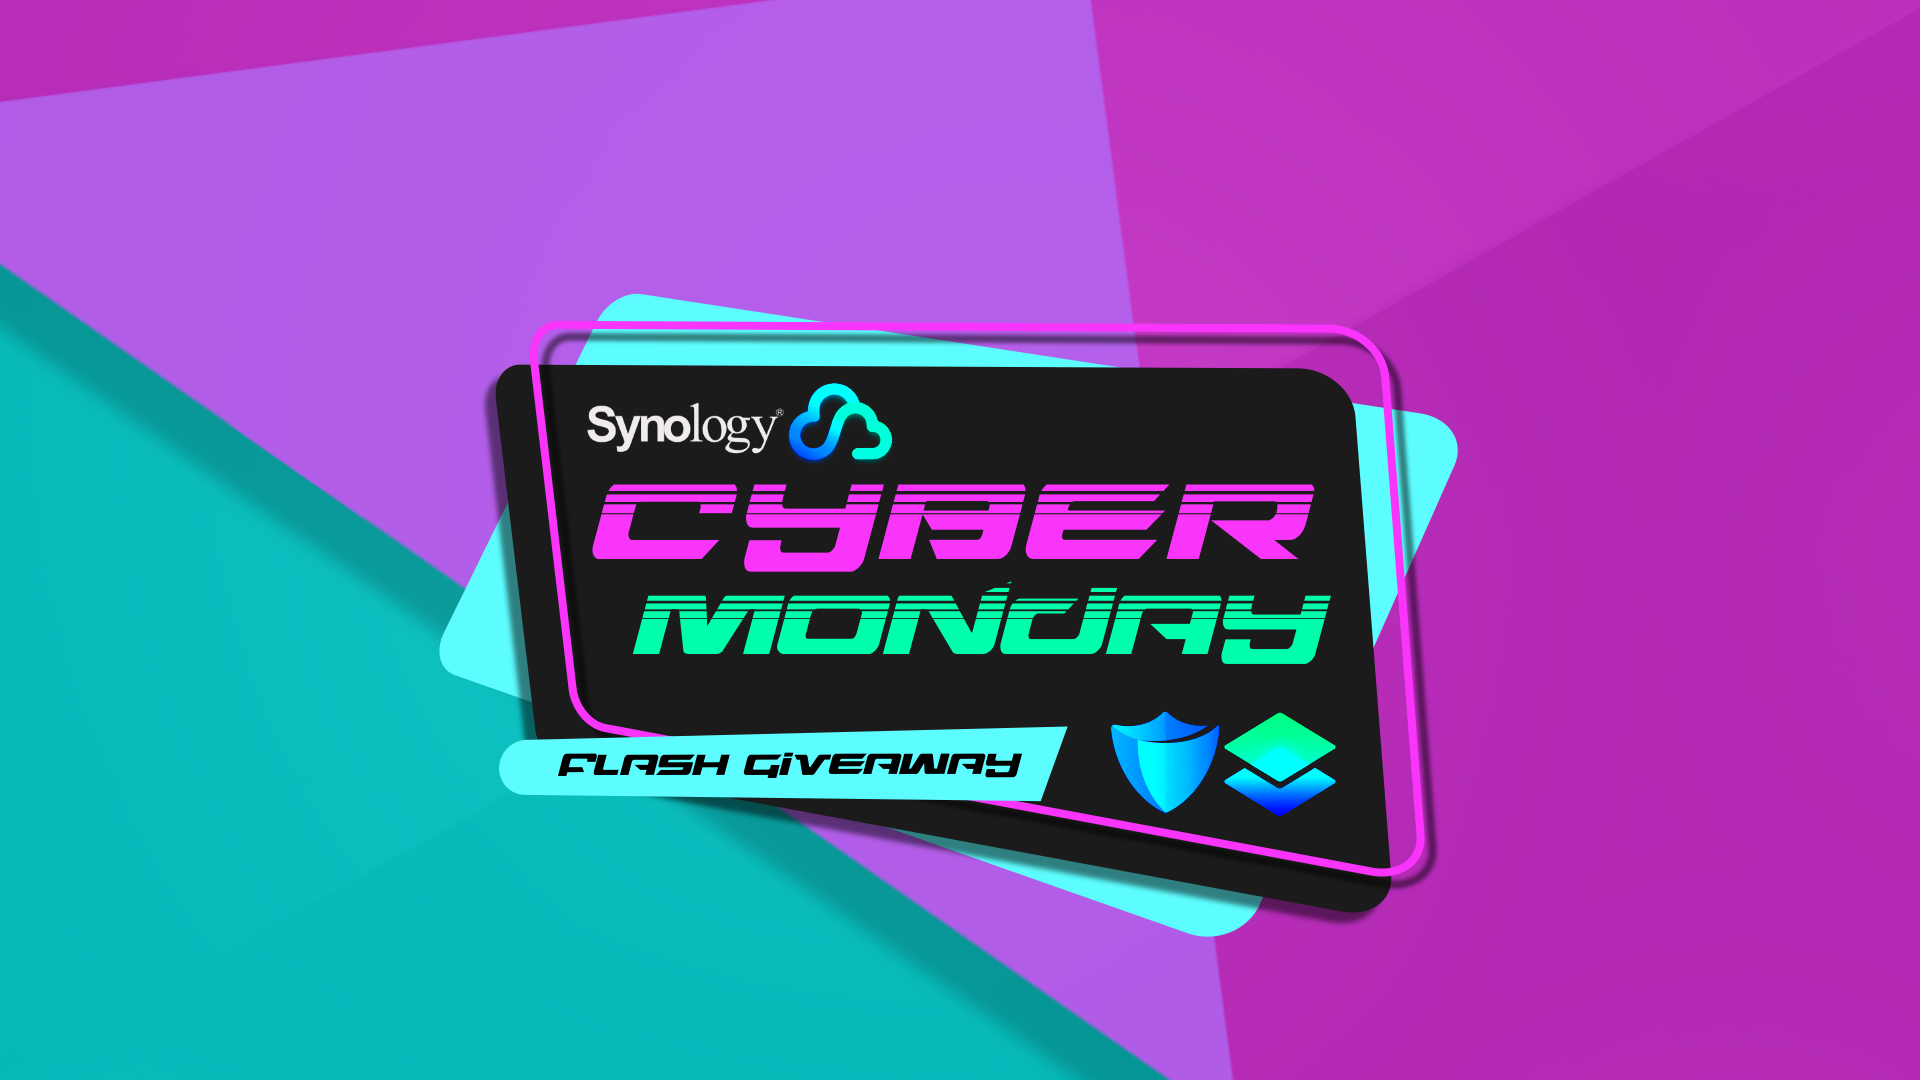 Synology Cyber Monday 2022 flash giveaway!